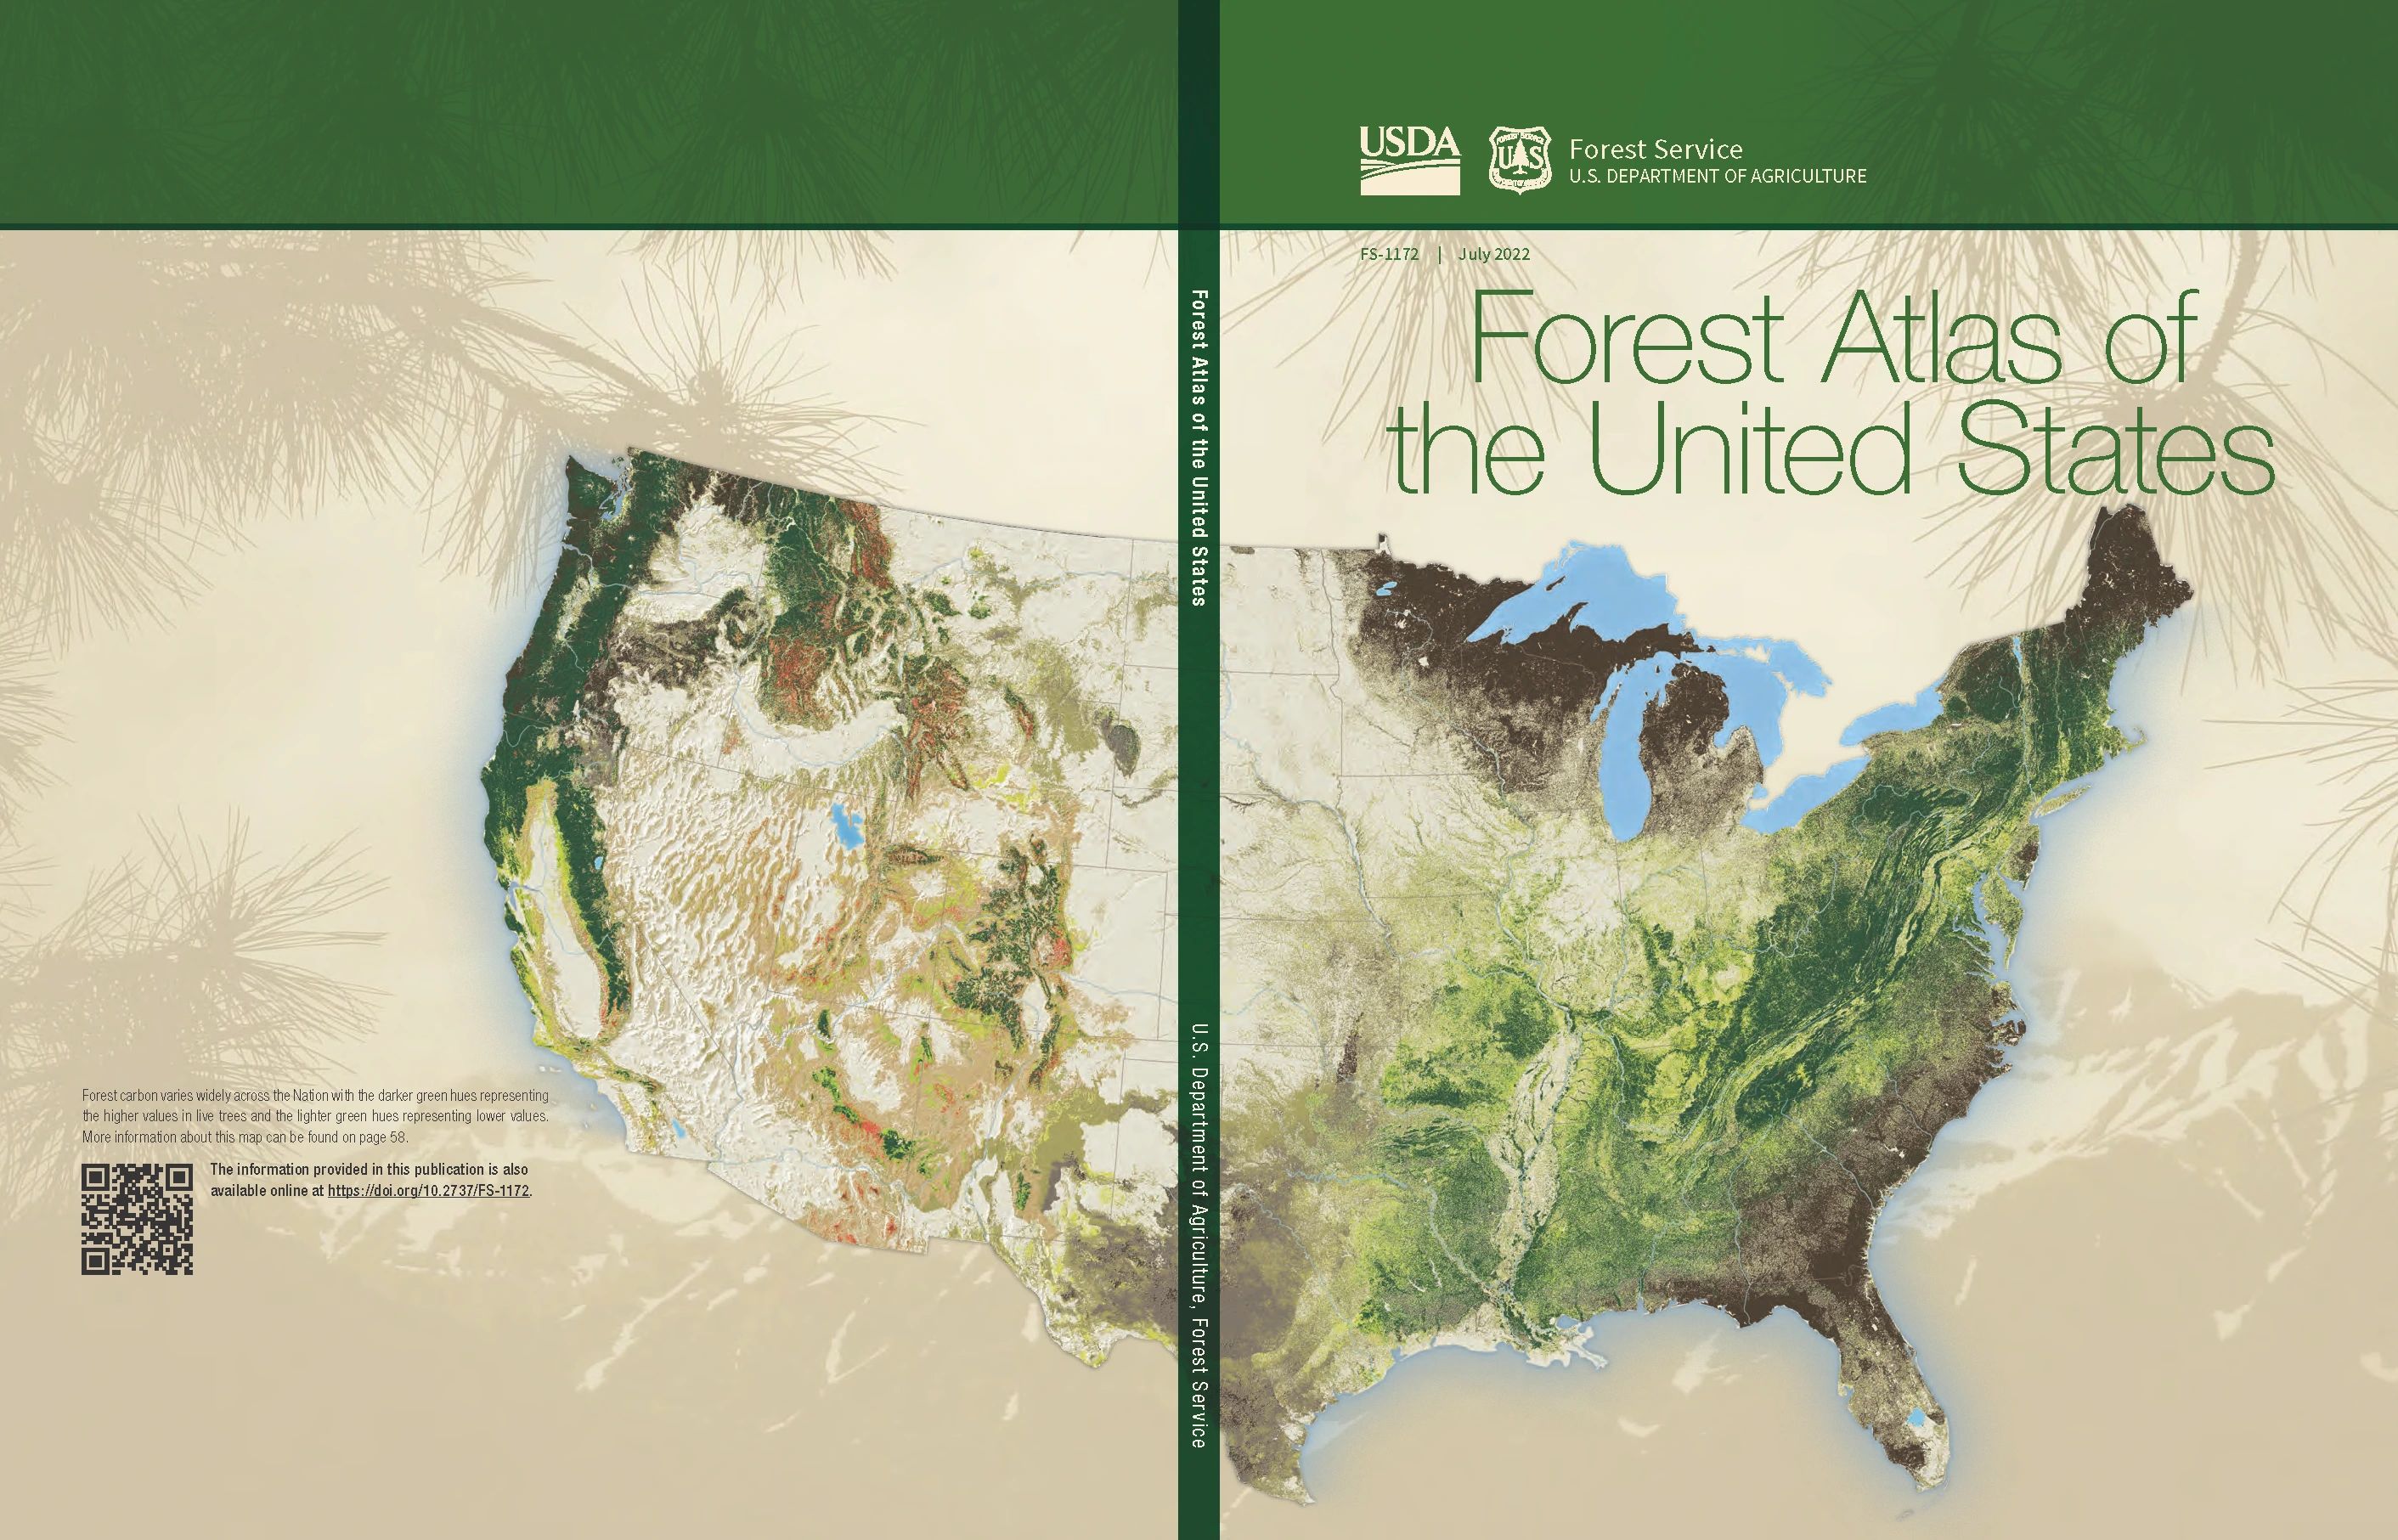 Bookcover of the Forest Atlas